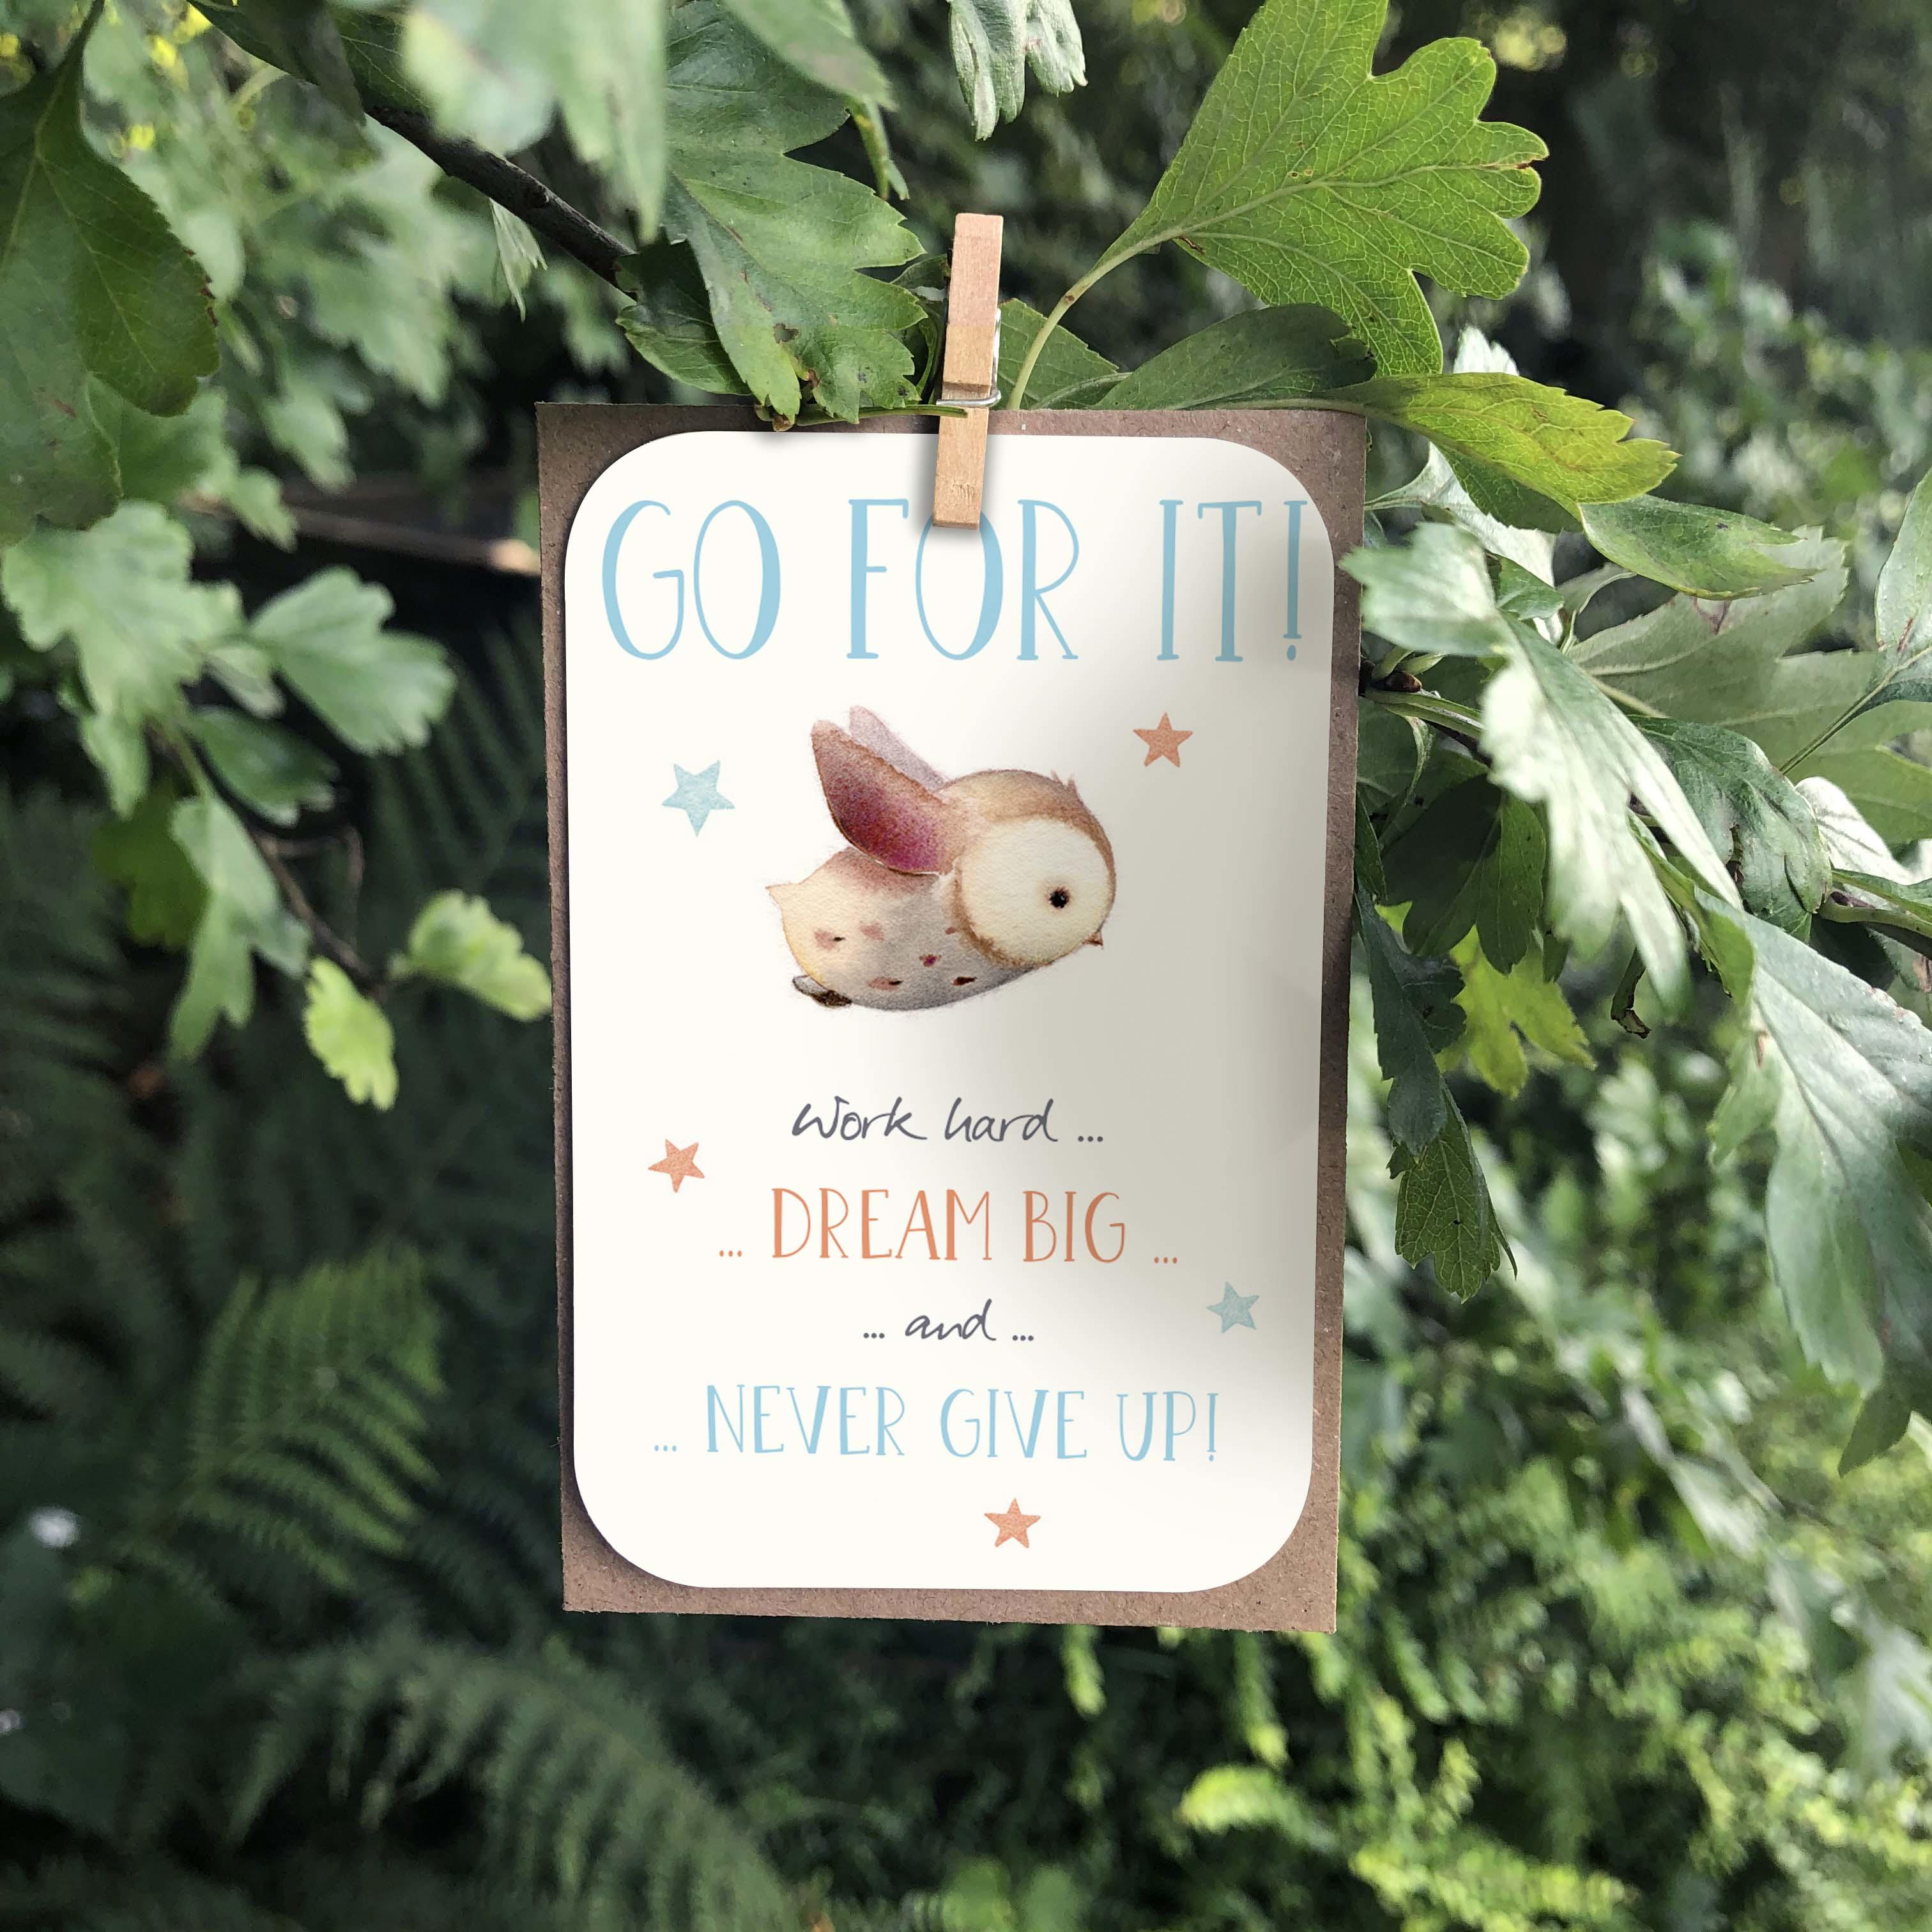 A small keepsake card with a “Go For It!” positive caption. Features an illustrated cute flying owl.